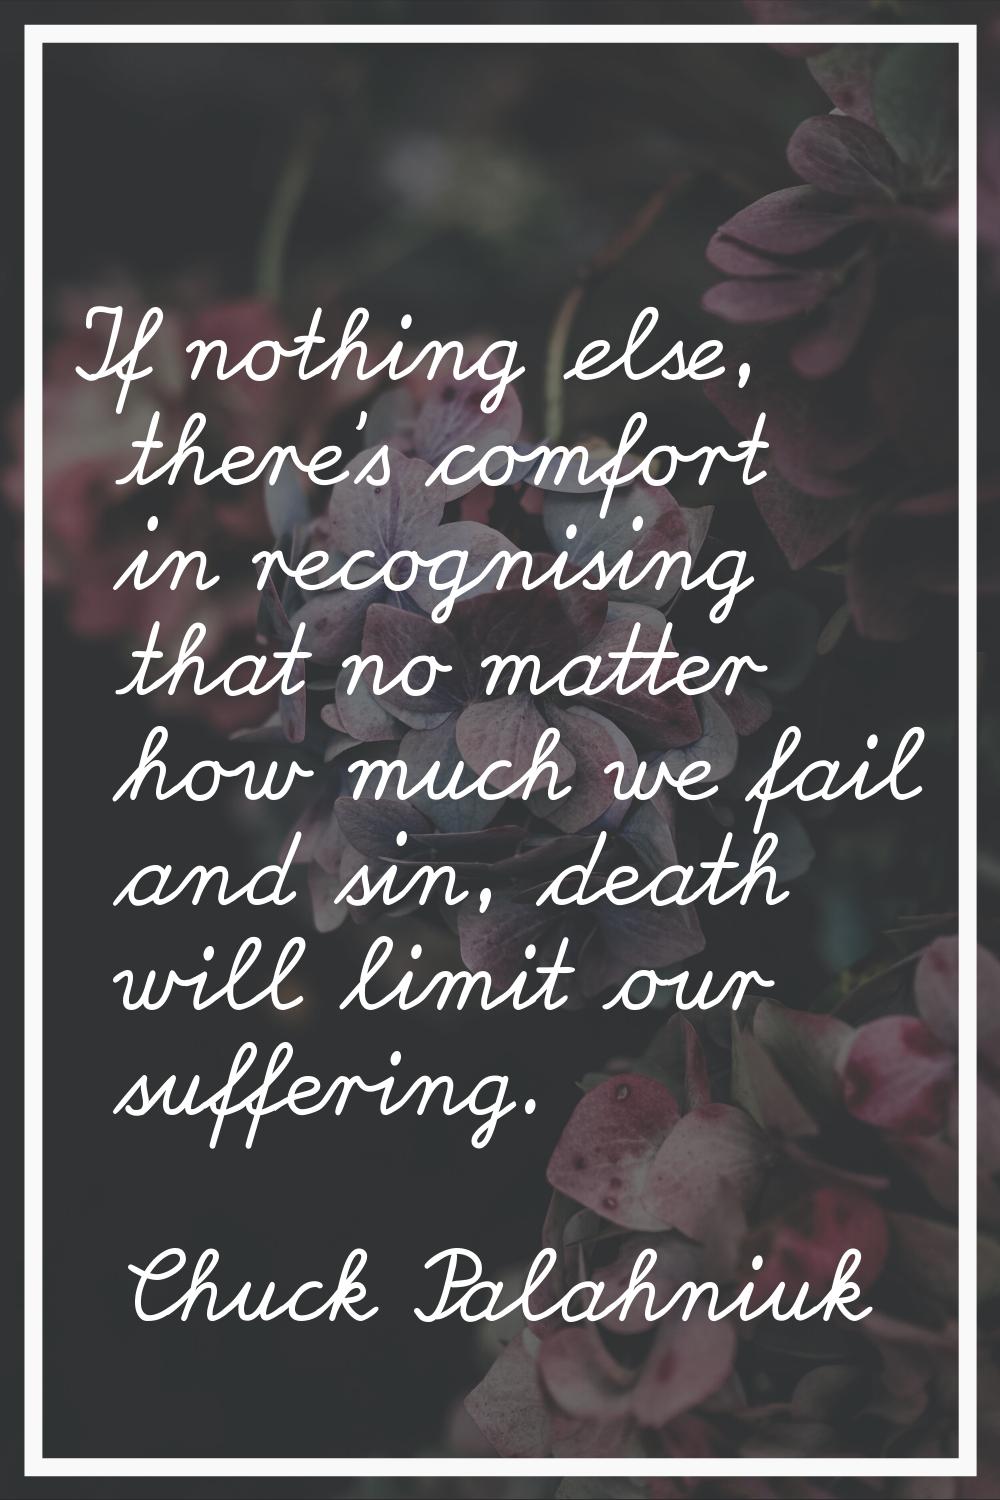 If nothing else, there's comfort in recognising that no matter how much we fail and sin, death will